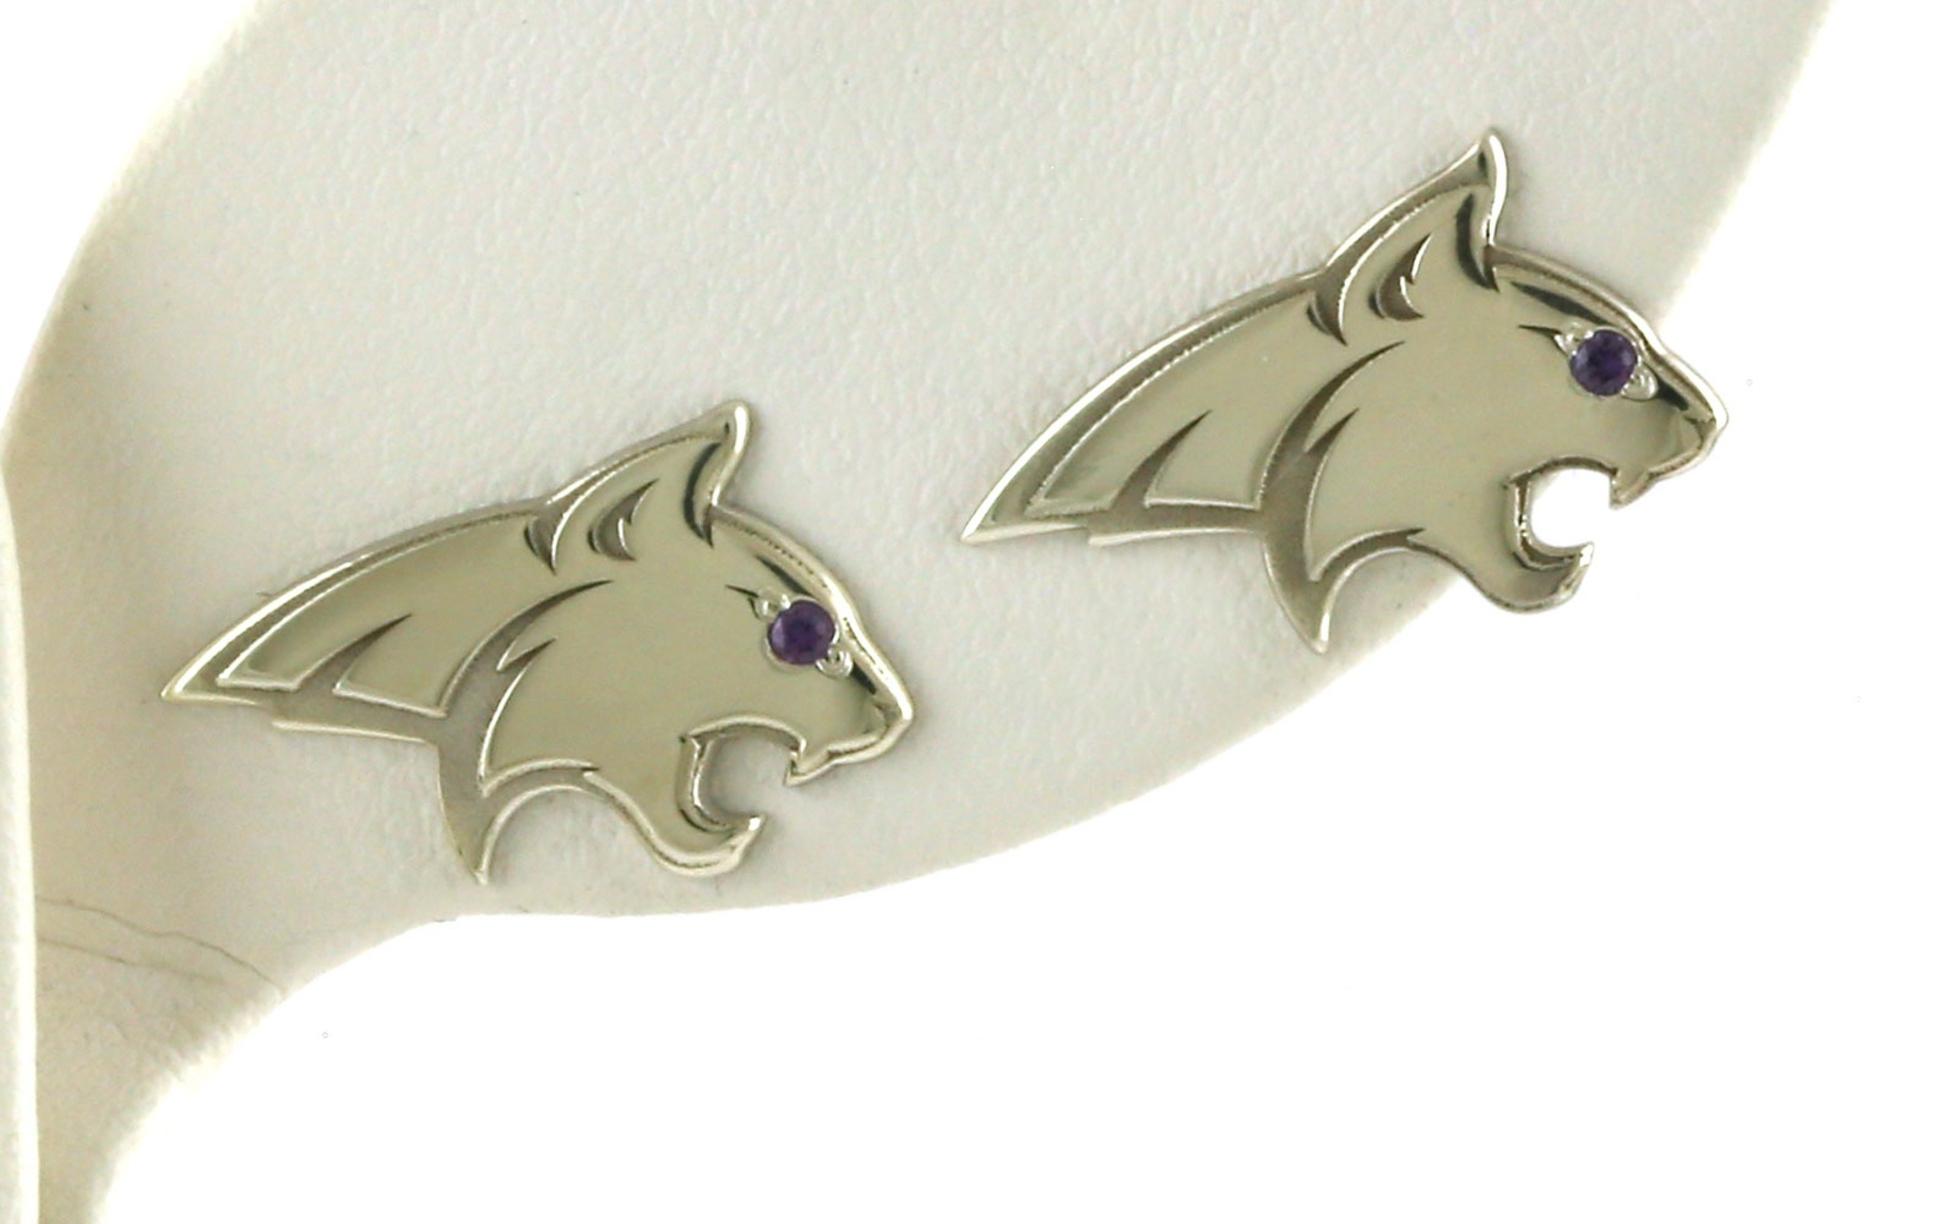 Large Official Bobcat Stud Earrings with Huckleberry Sapphire Eye in Sterling Silver (0.03cts TWT)